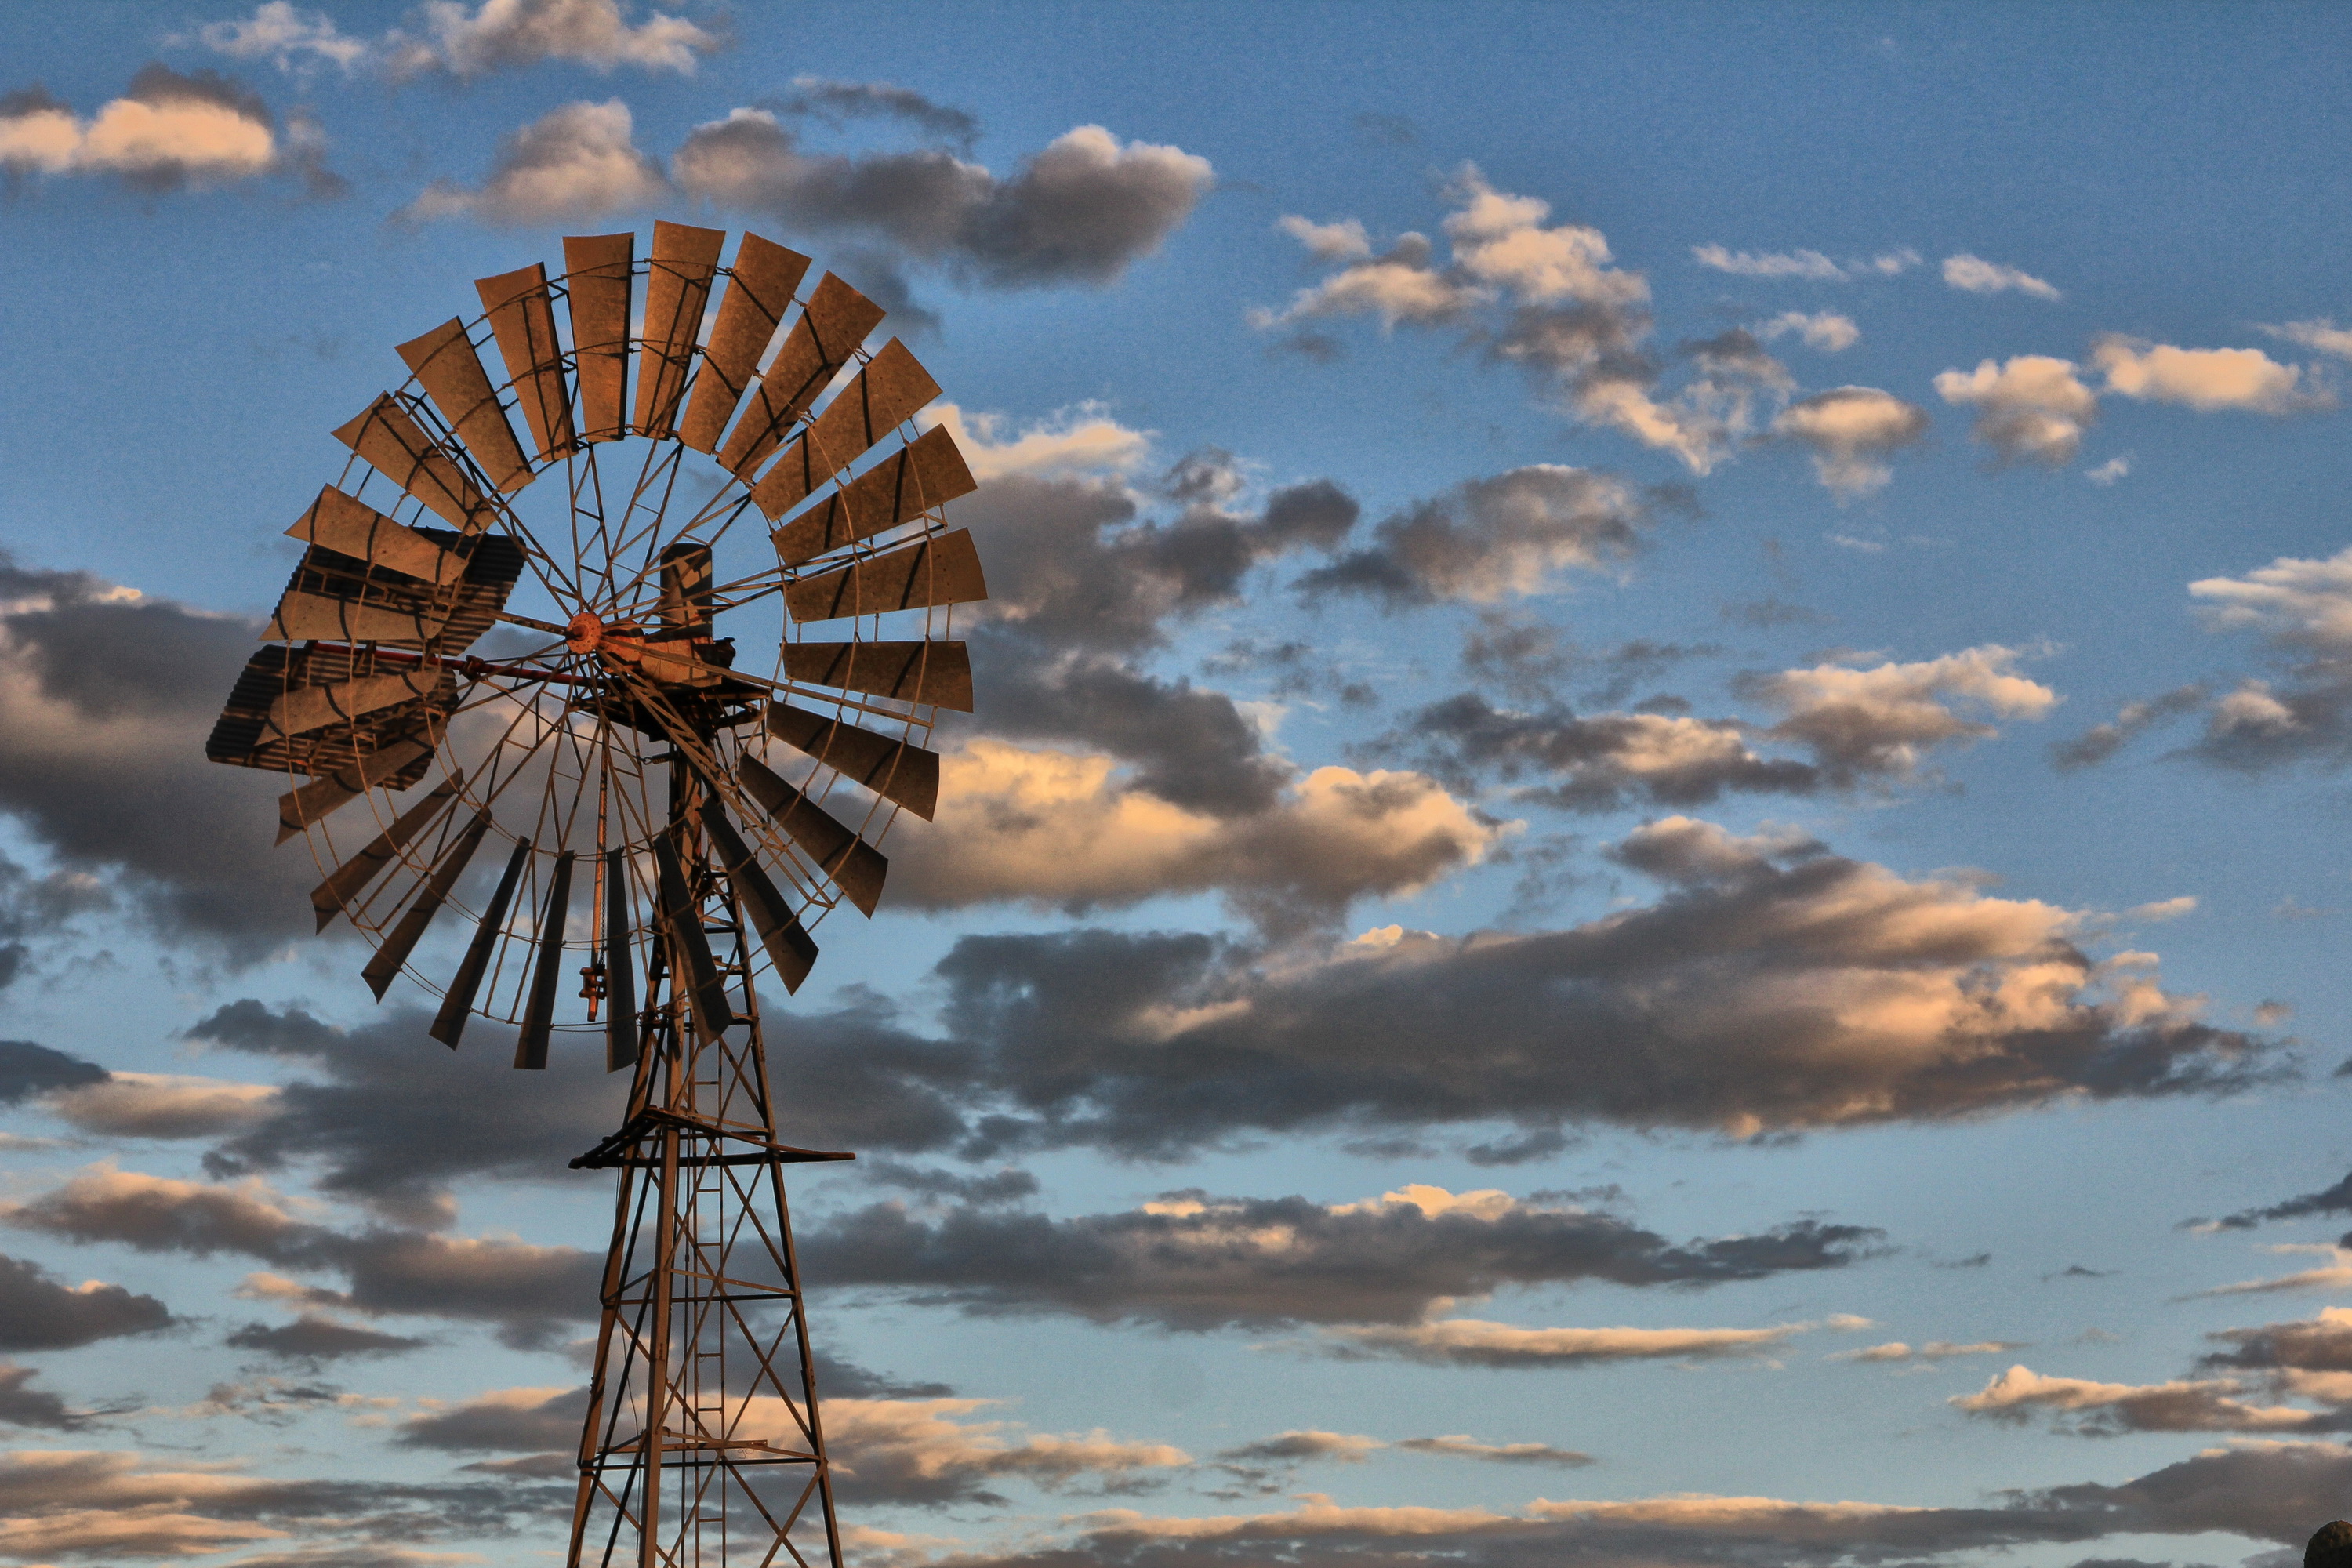 The Boomskraap wind pump at the end of day. Image: Chris Marais